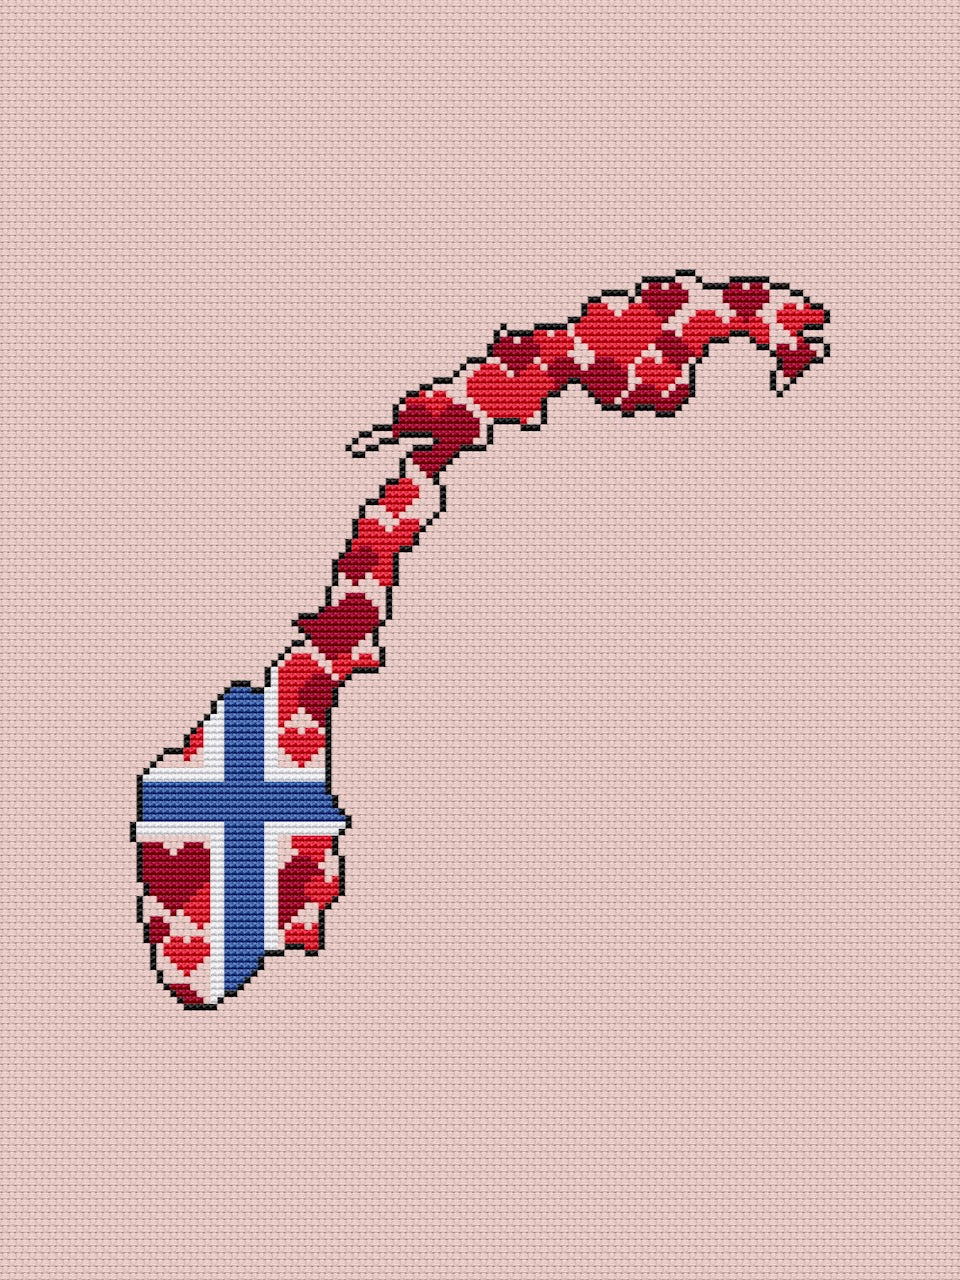 Norway embroidery